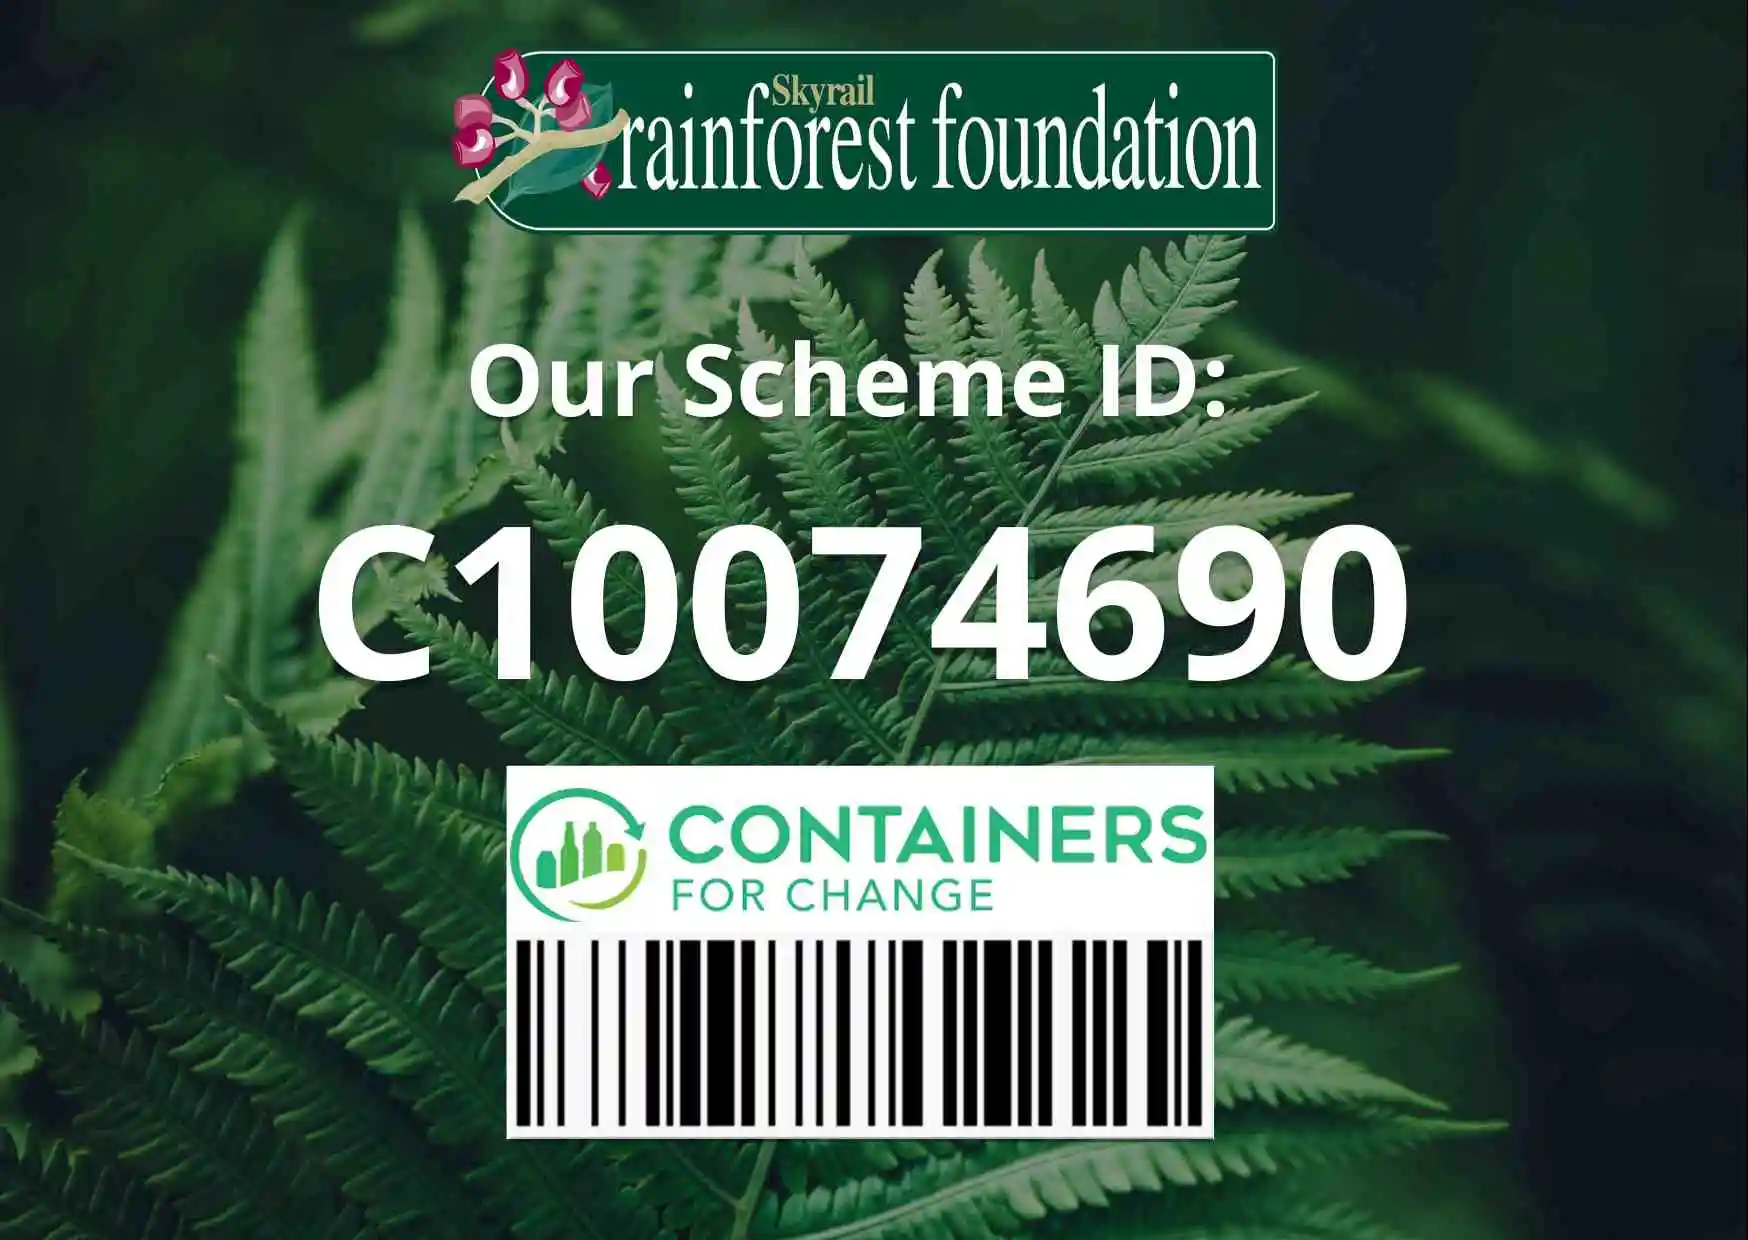 Scheme ID for Skyrail Rainforest Foundation at Containers for Change